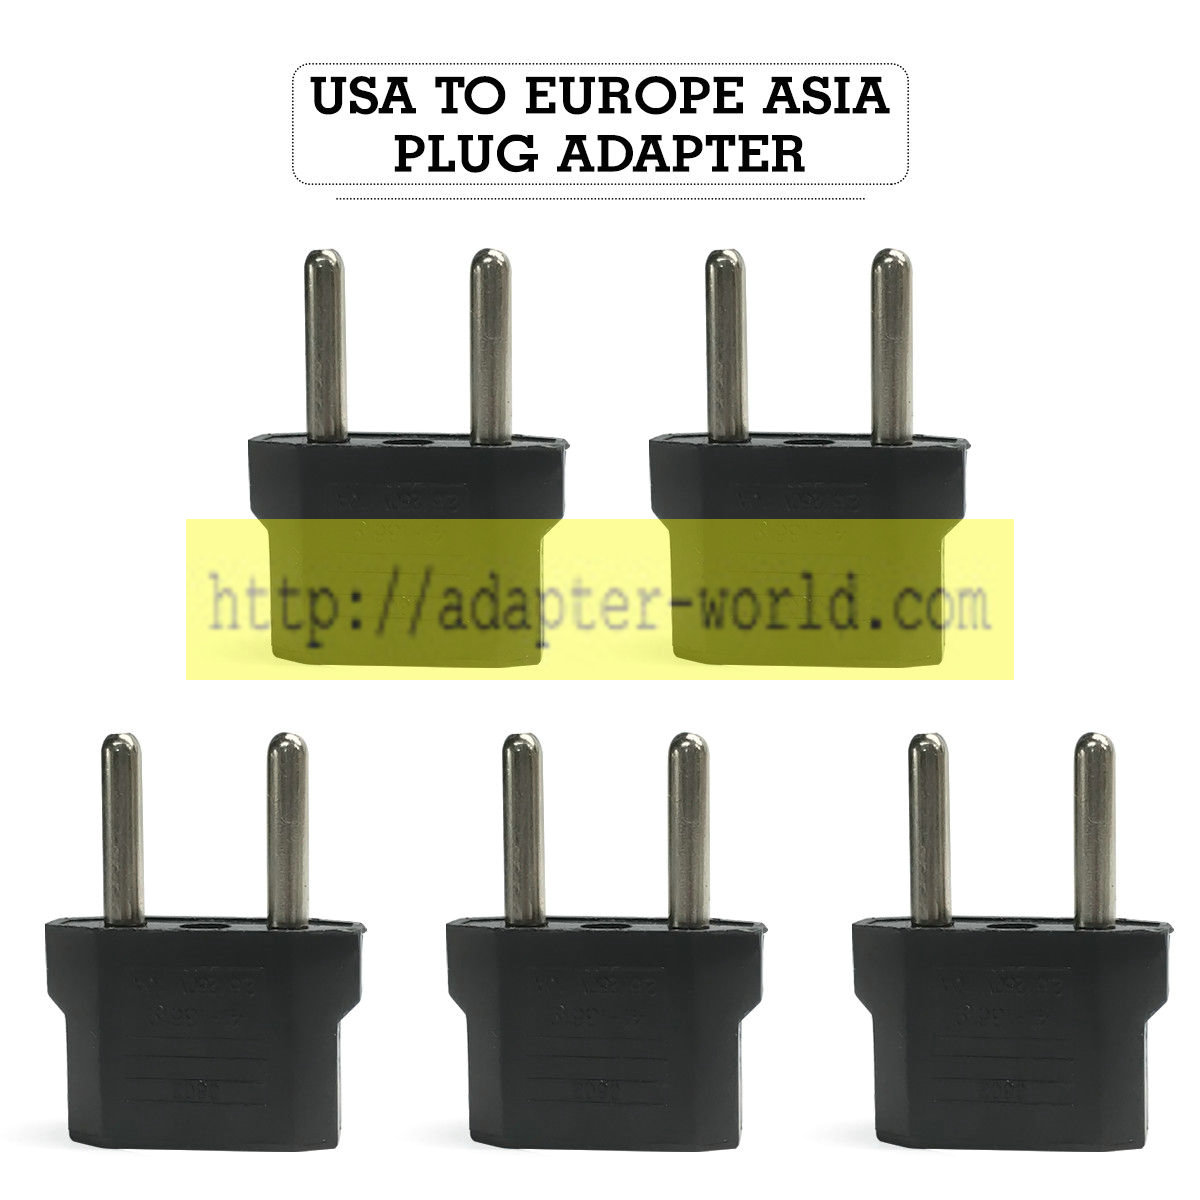 *Brand NEW*5 Lot Travel Foreign Adapter Round Plug from 110V to 220V Europe Asia Converters AC Adapter Power S